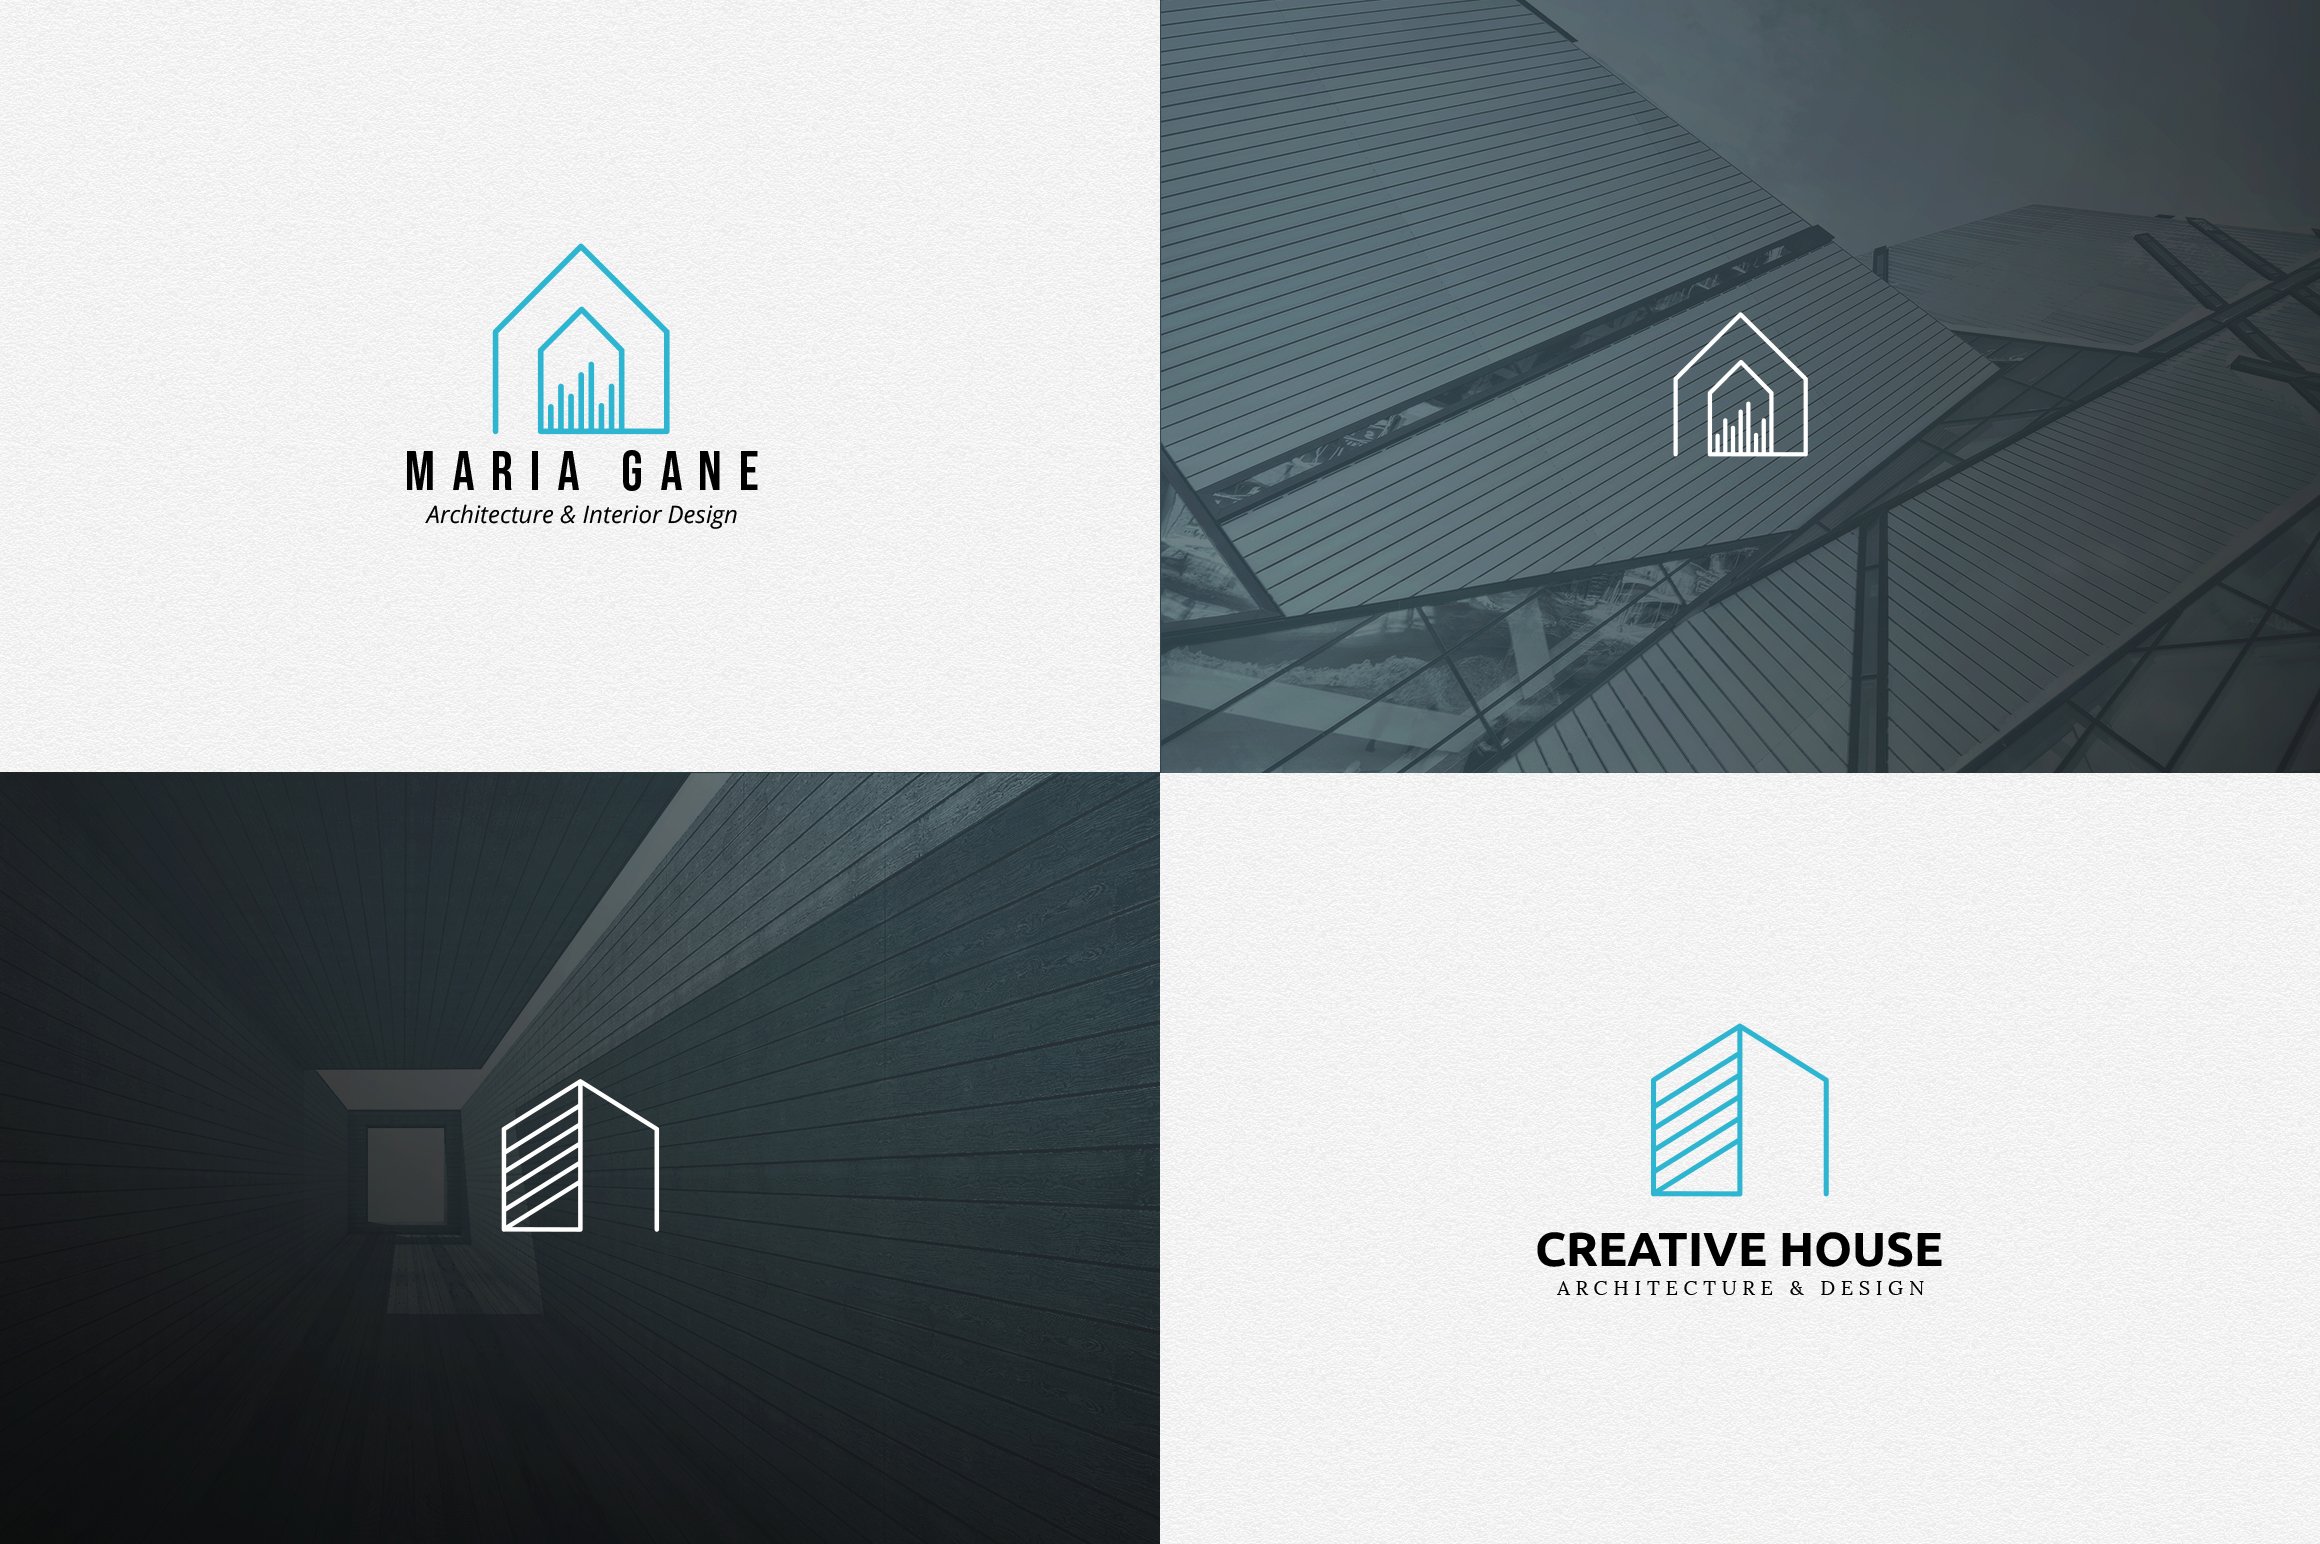 Four logos options for architecture projects.